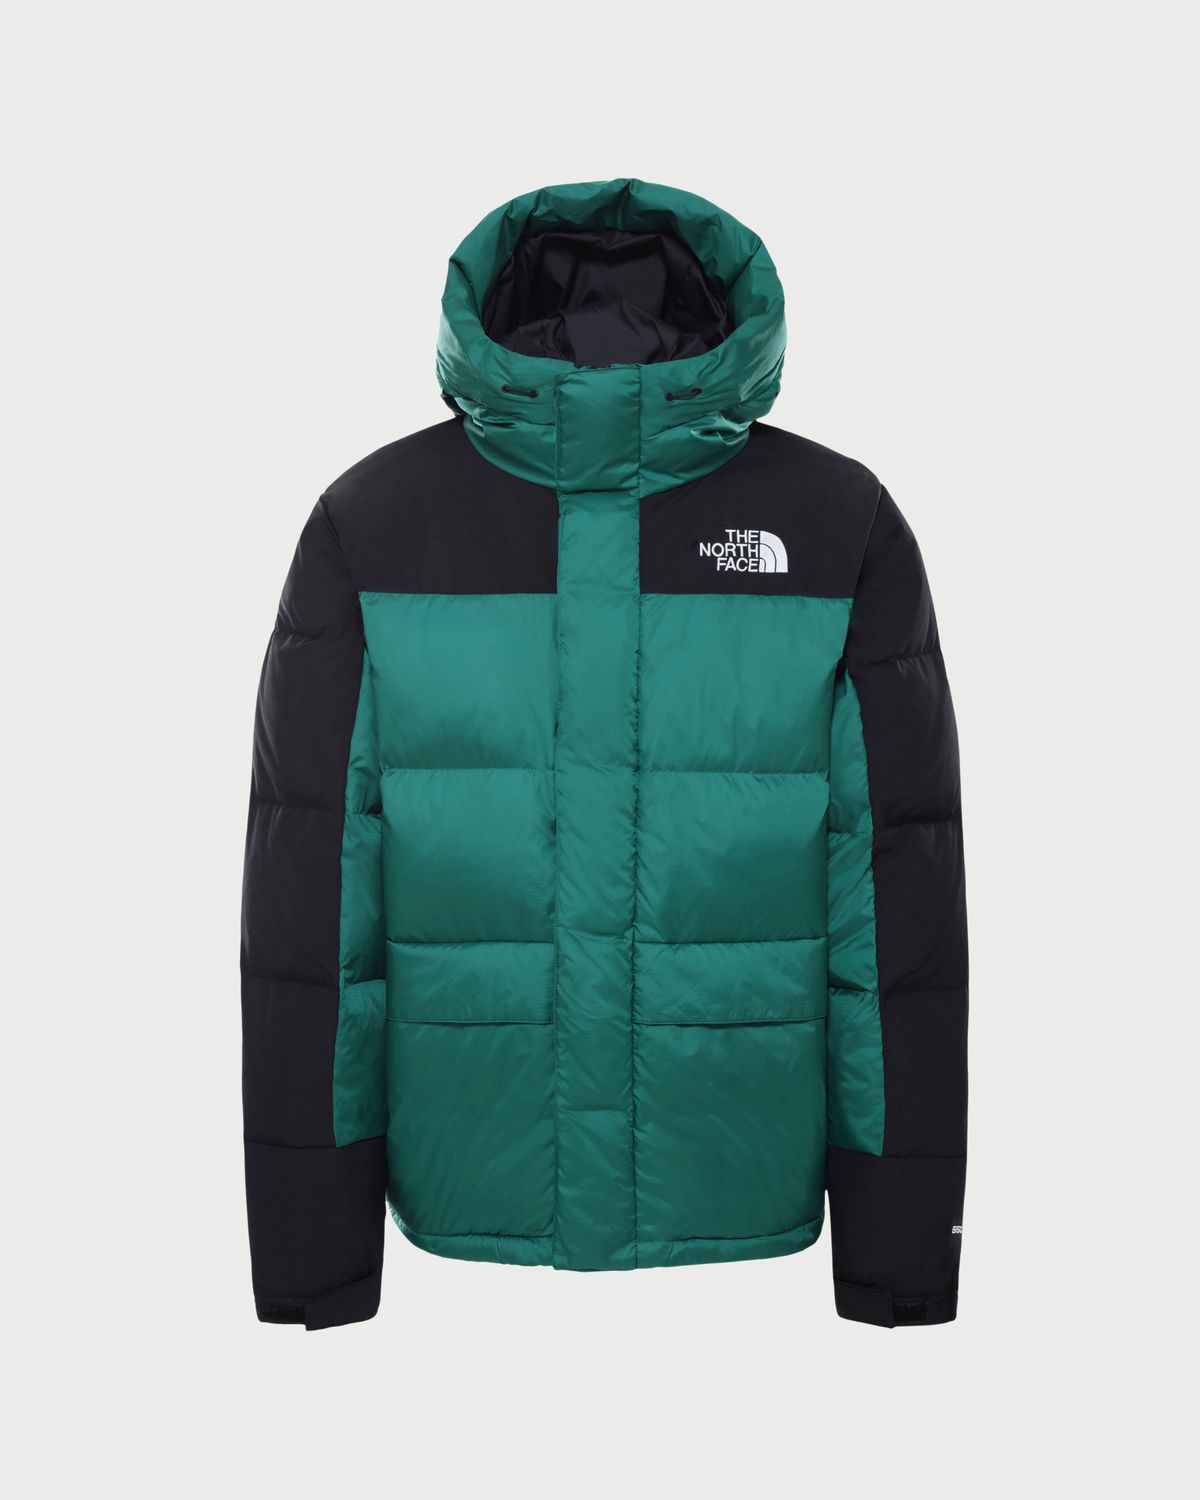 The North Face – Himalayan Down Jacket Peak Evergreen Unisex - Down Jackets - Green - Image 1